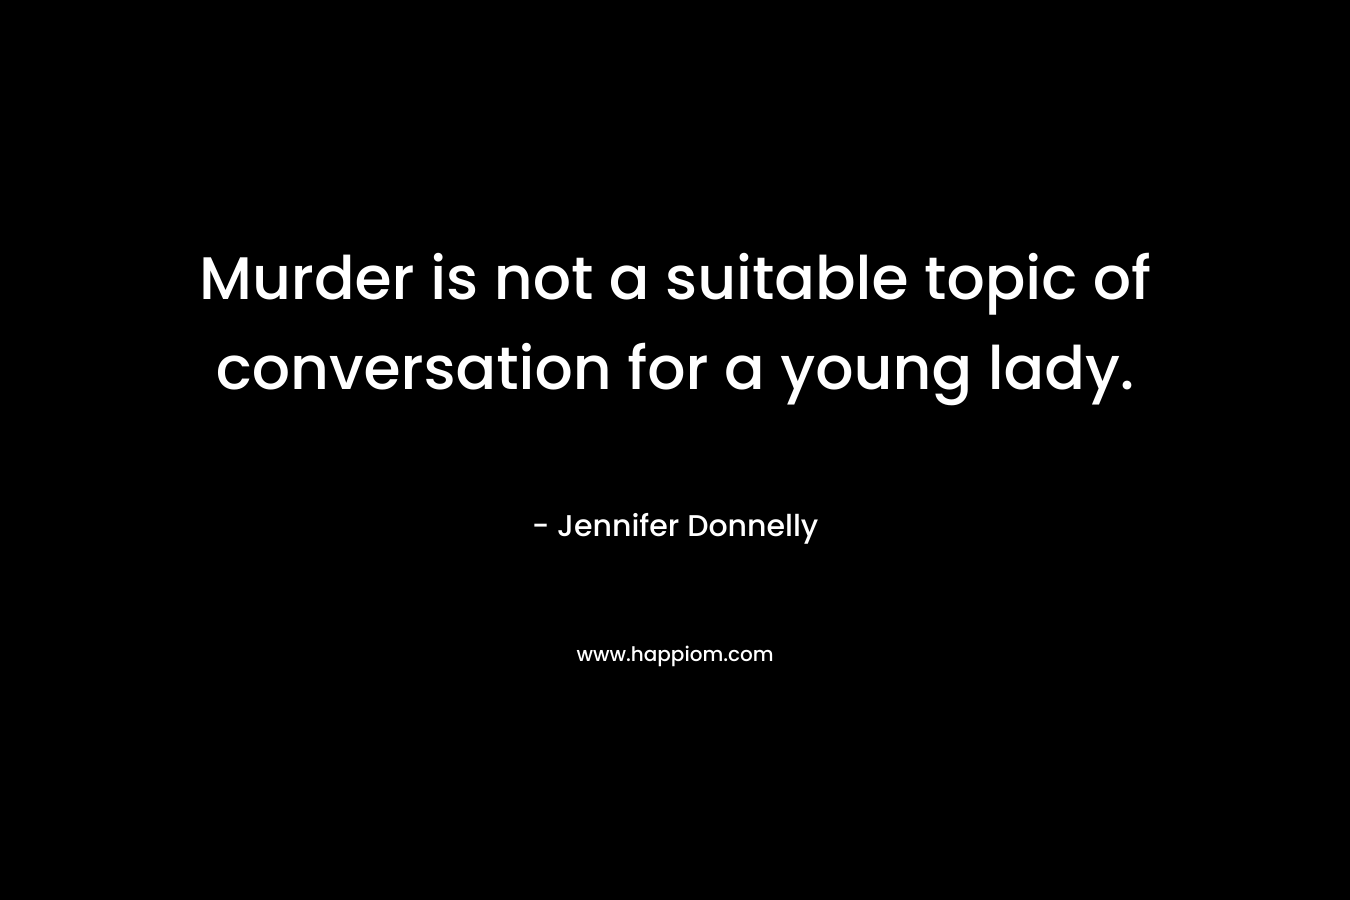 Murder is not a suitable topic of conversation for a young lady. – Jennifer Donnelly